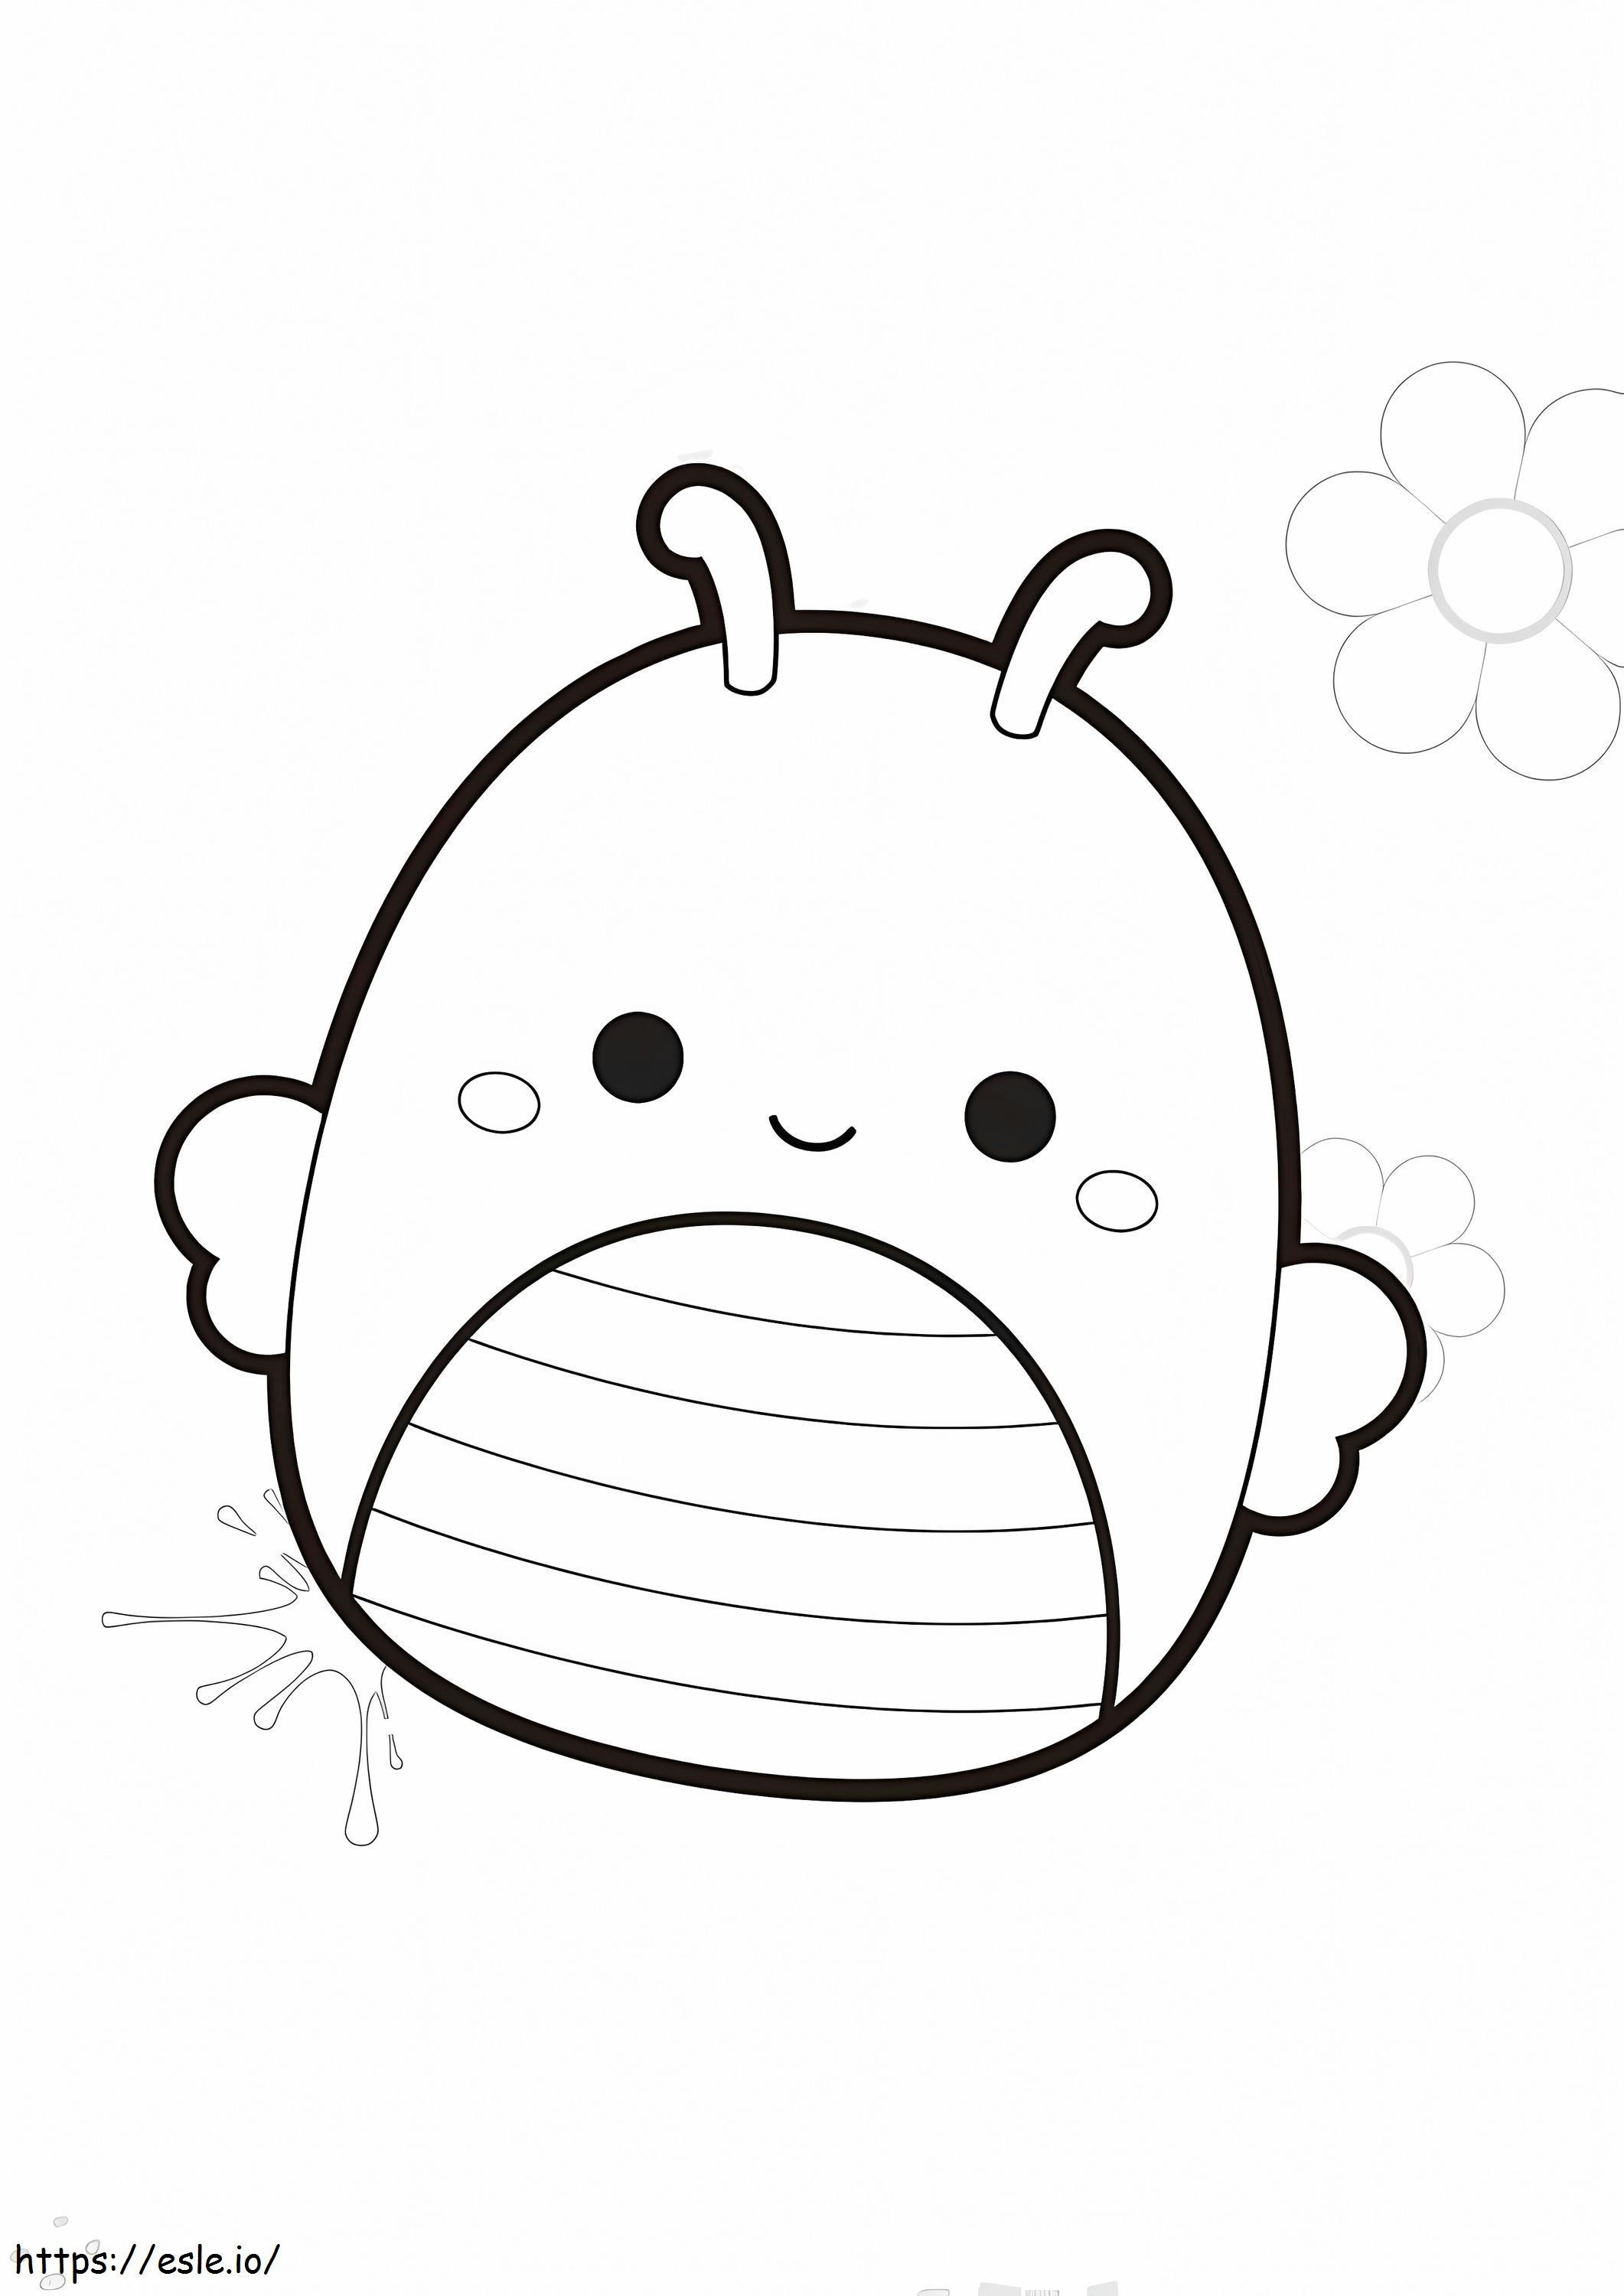 Sunny Squishmallows coloring page